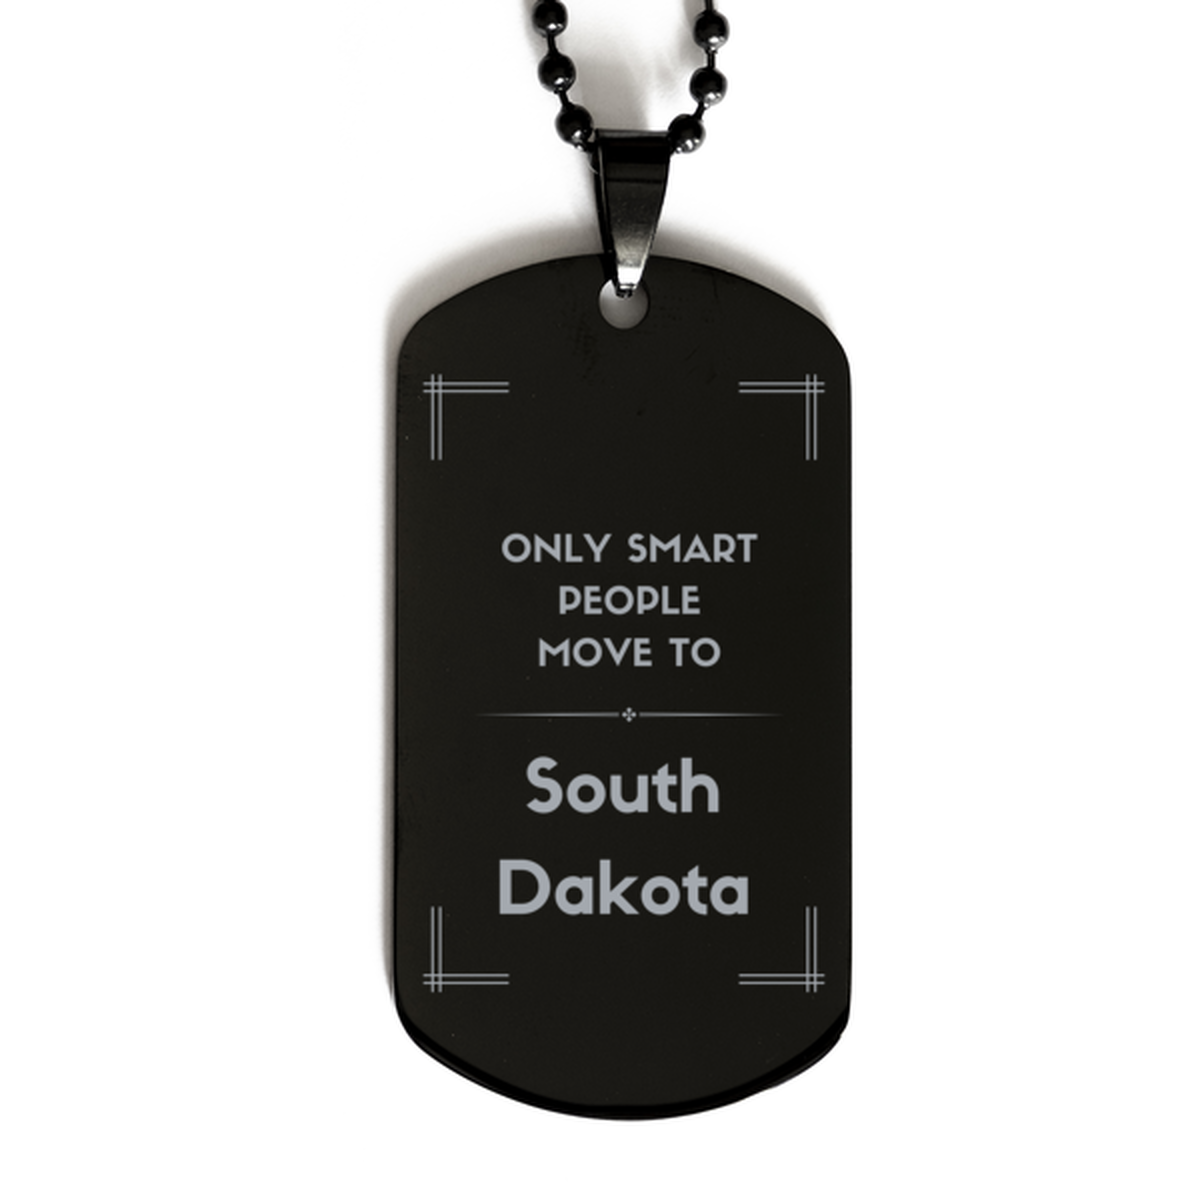 Only smart people move to South Dakota Black Dog Tag, Gag Gifts For South Dakota, Move to South Dakota Gifts for Friends Coworker Funny Saying Quote